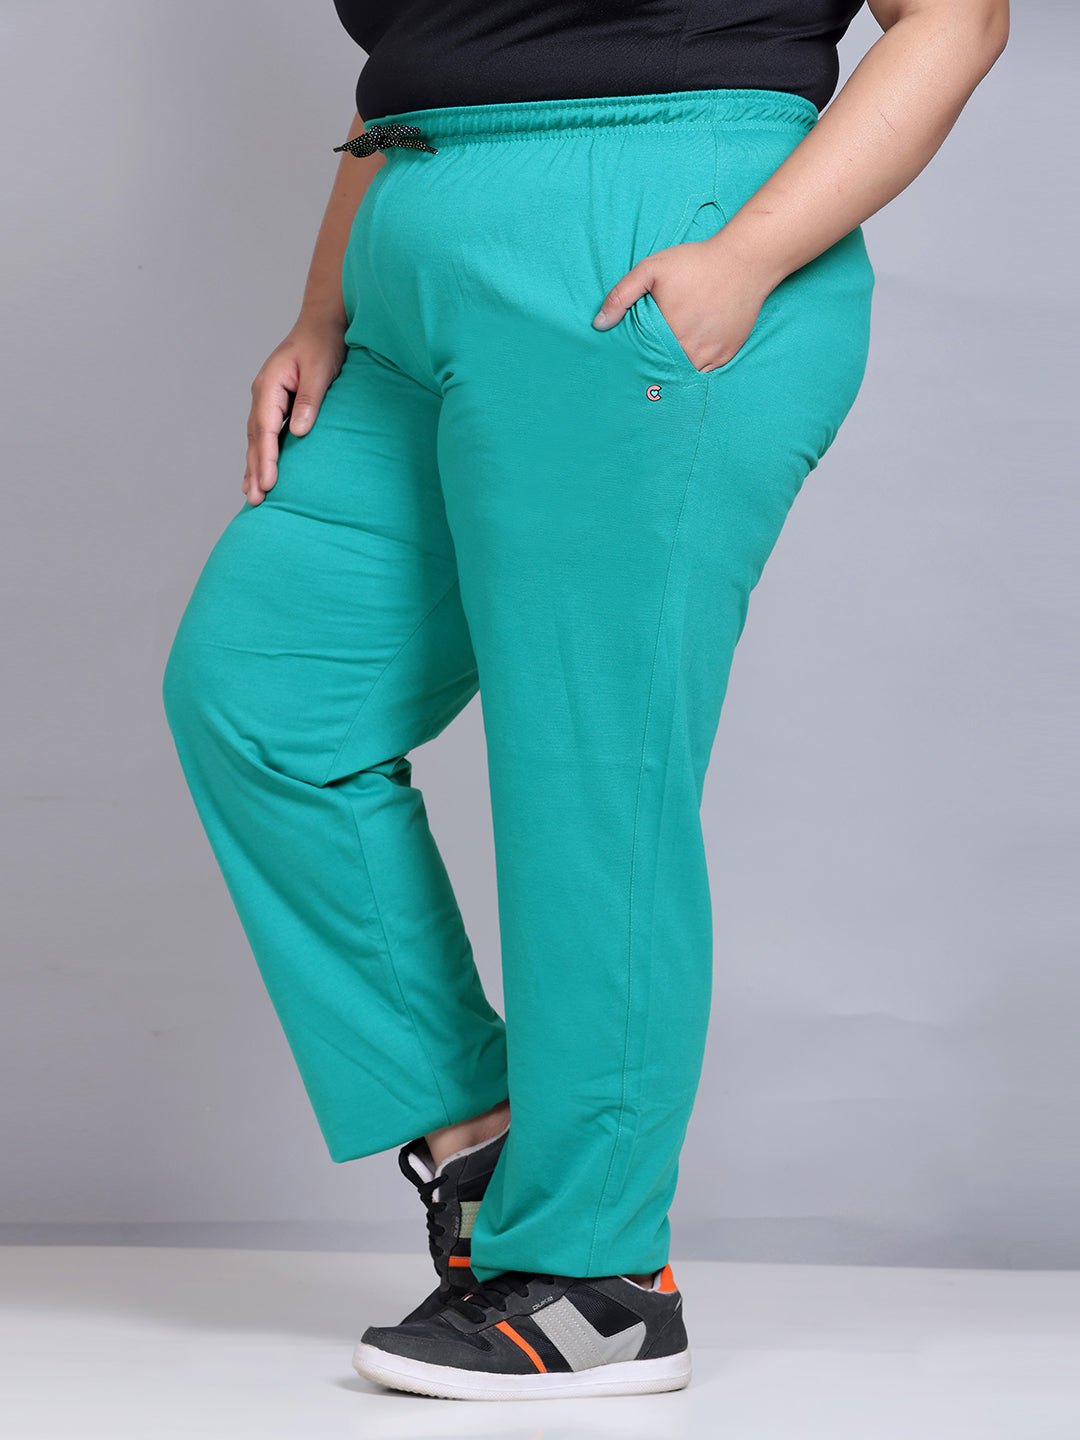 Comfy Persian Green Cotton Track Pants For Women At Best Prices